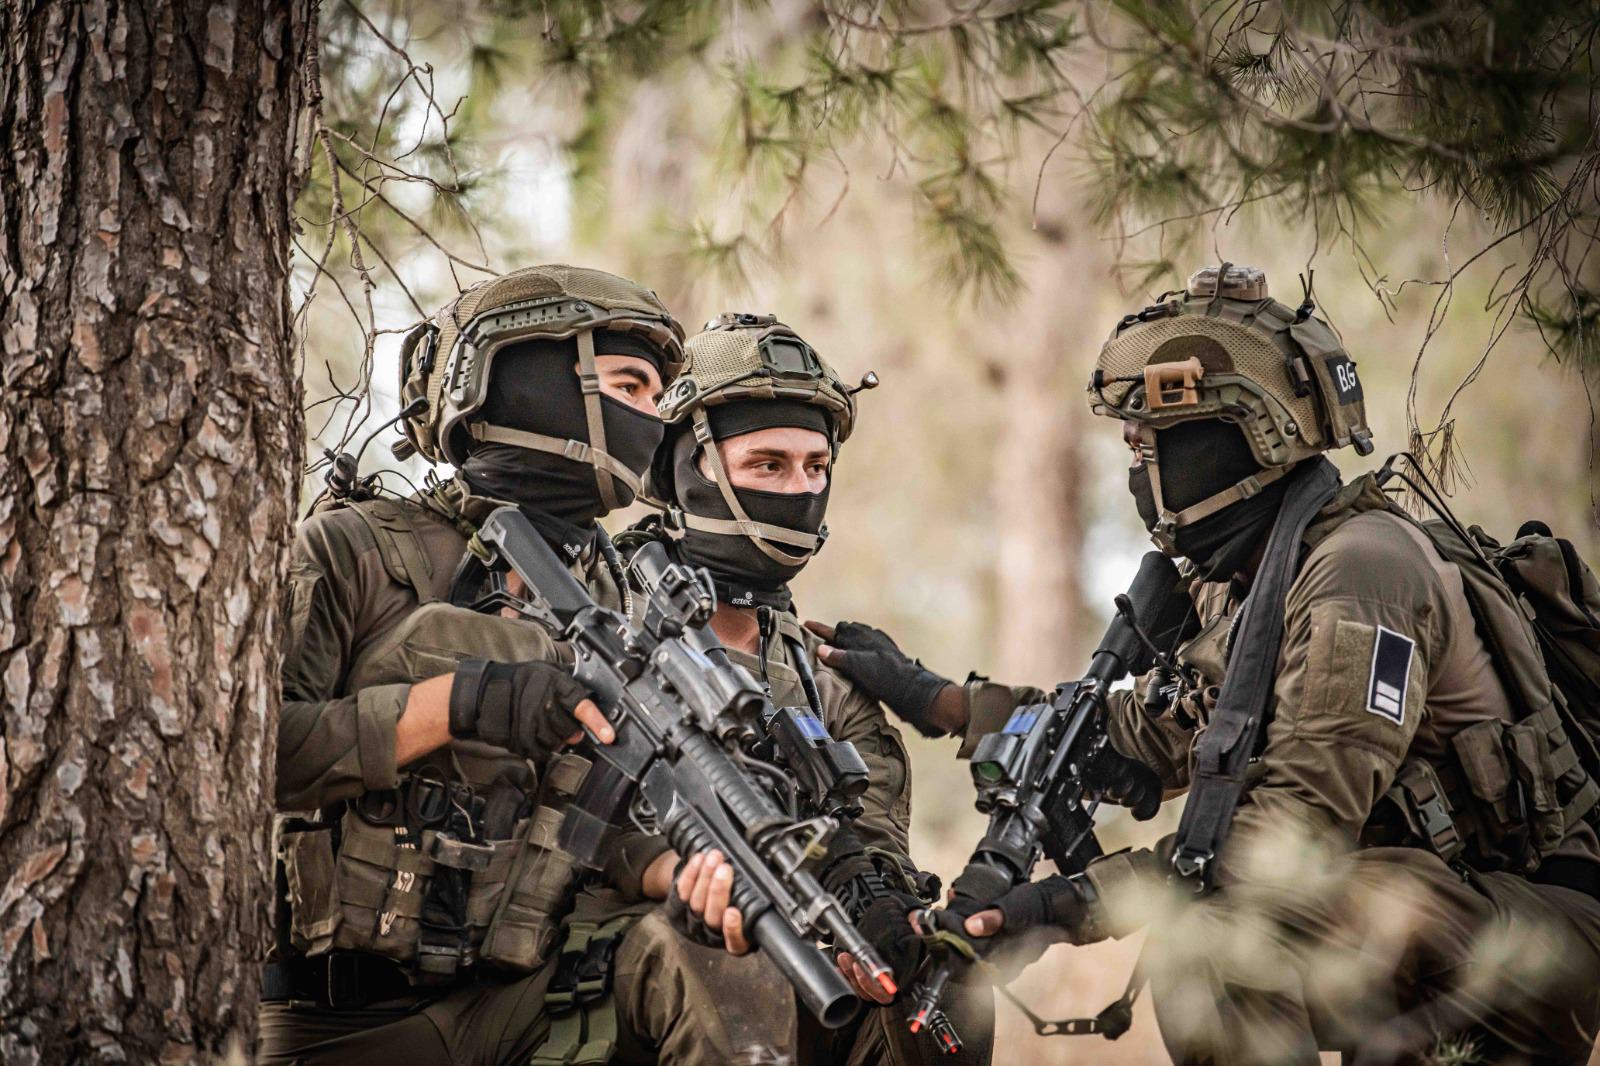 Soldiers from the Israeli Air Force's elite Shaldag Unit take part in an exercise in an undated photograph.